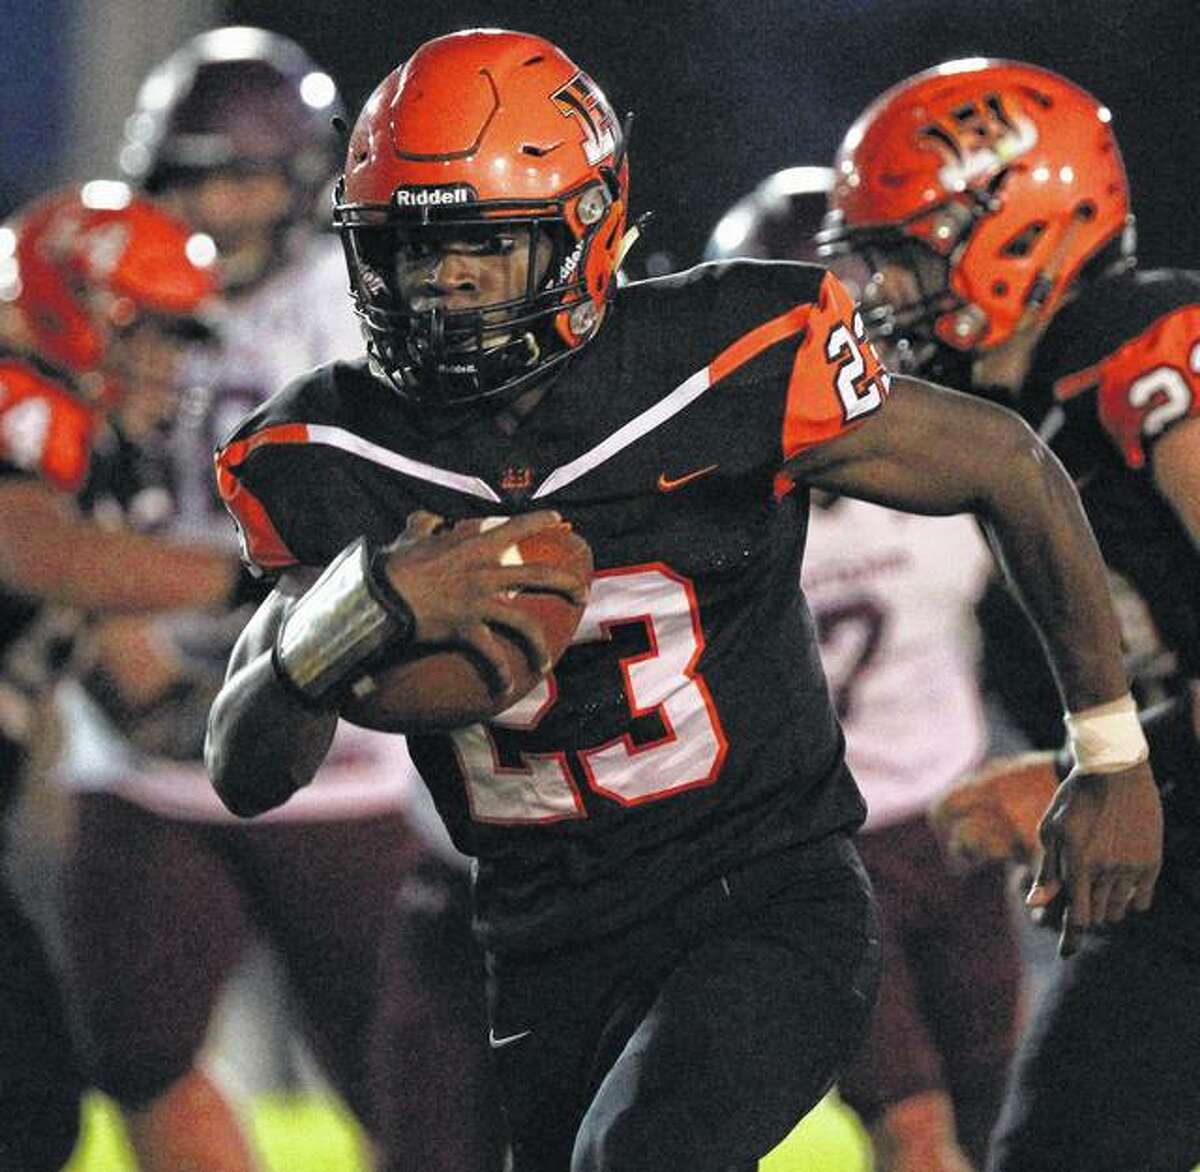 Beardstown’s Pascal Guilavogui picks up yardage in a game against Mendon Unity Friday night in Beardstown.